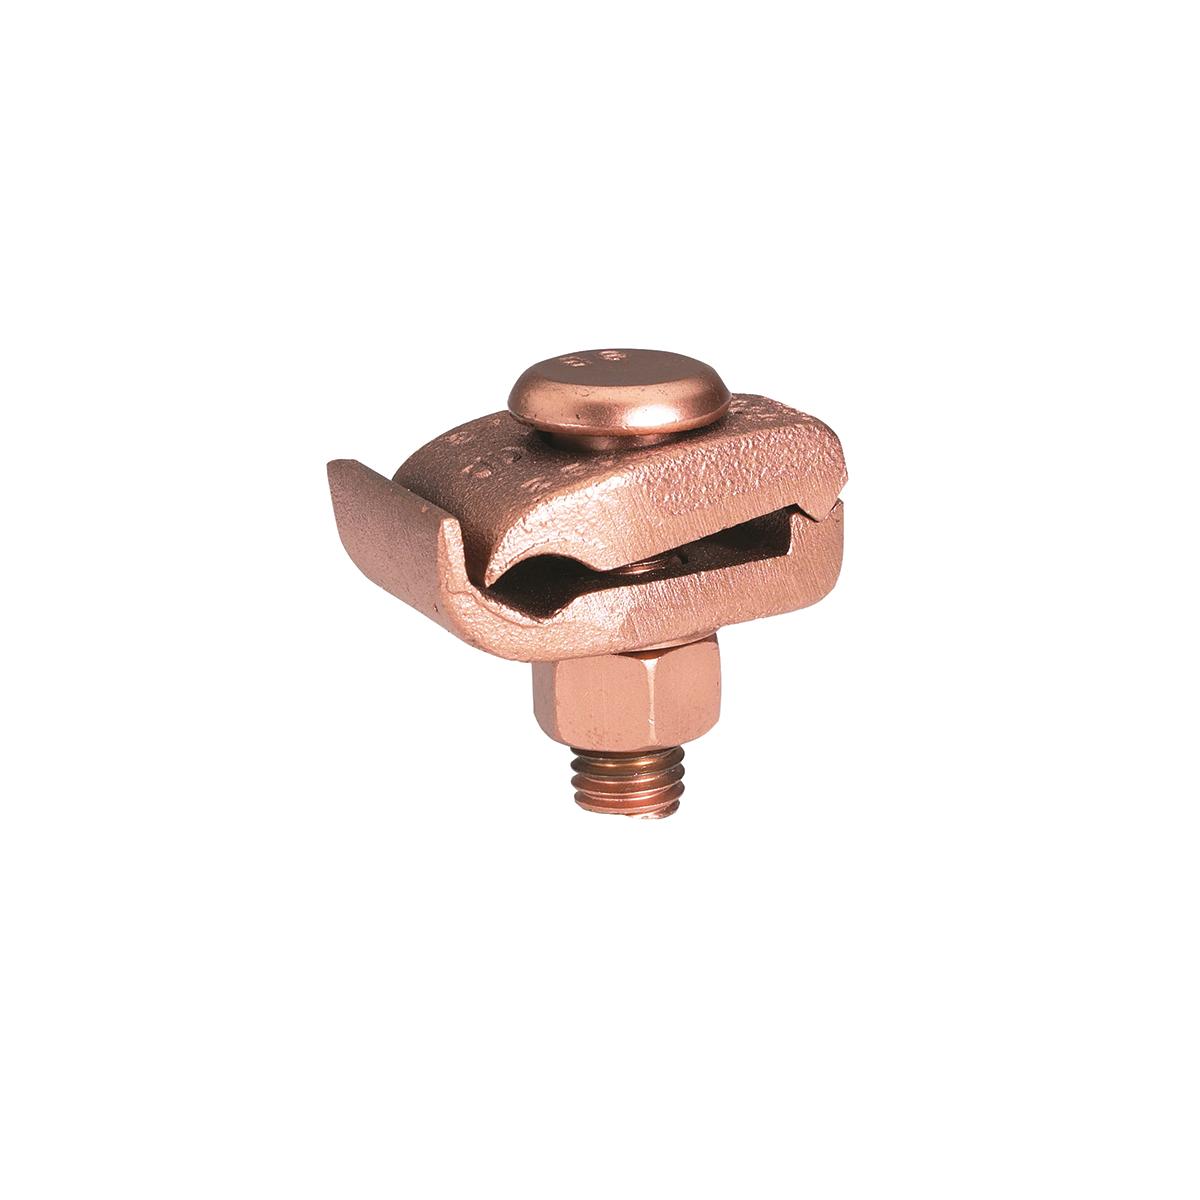 Hubbell GB4C Mechanical Grounding Connector, Cable to 1/4" Thick Bar, 8 AWG (Sol)- 4 AWG (Str), 3/8" Stud1-1/4 IN Width.  ; Features: High Copper Alloy Ground Connector For Joining A Range Of Cable To 1/4 IN Thick Bar, Type GB Separates Cable From Bar, One-Wrench Inst